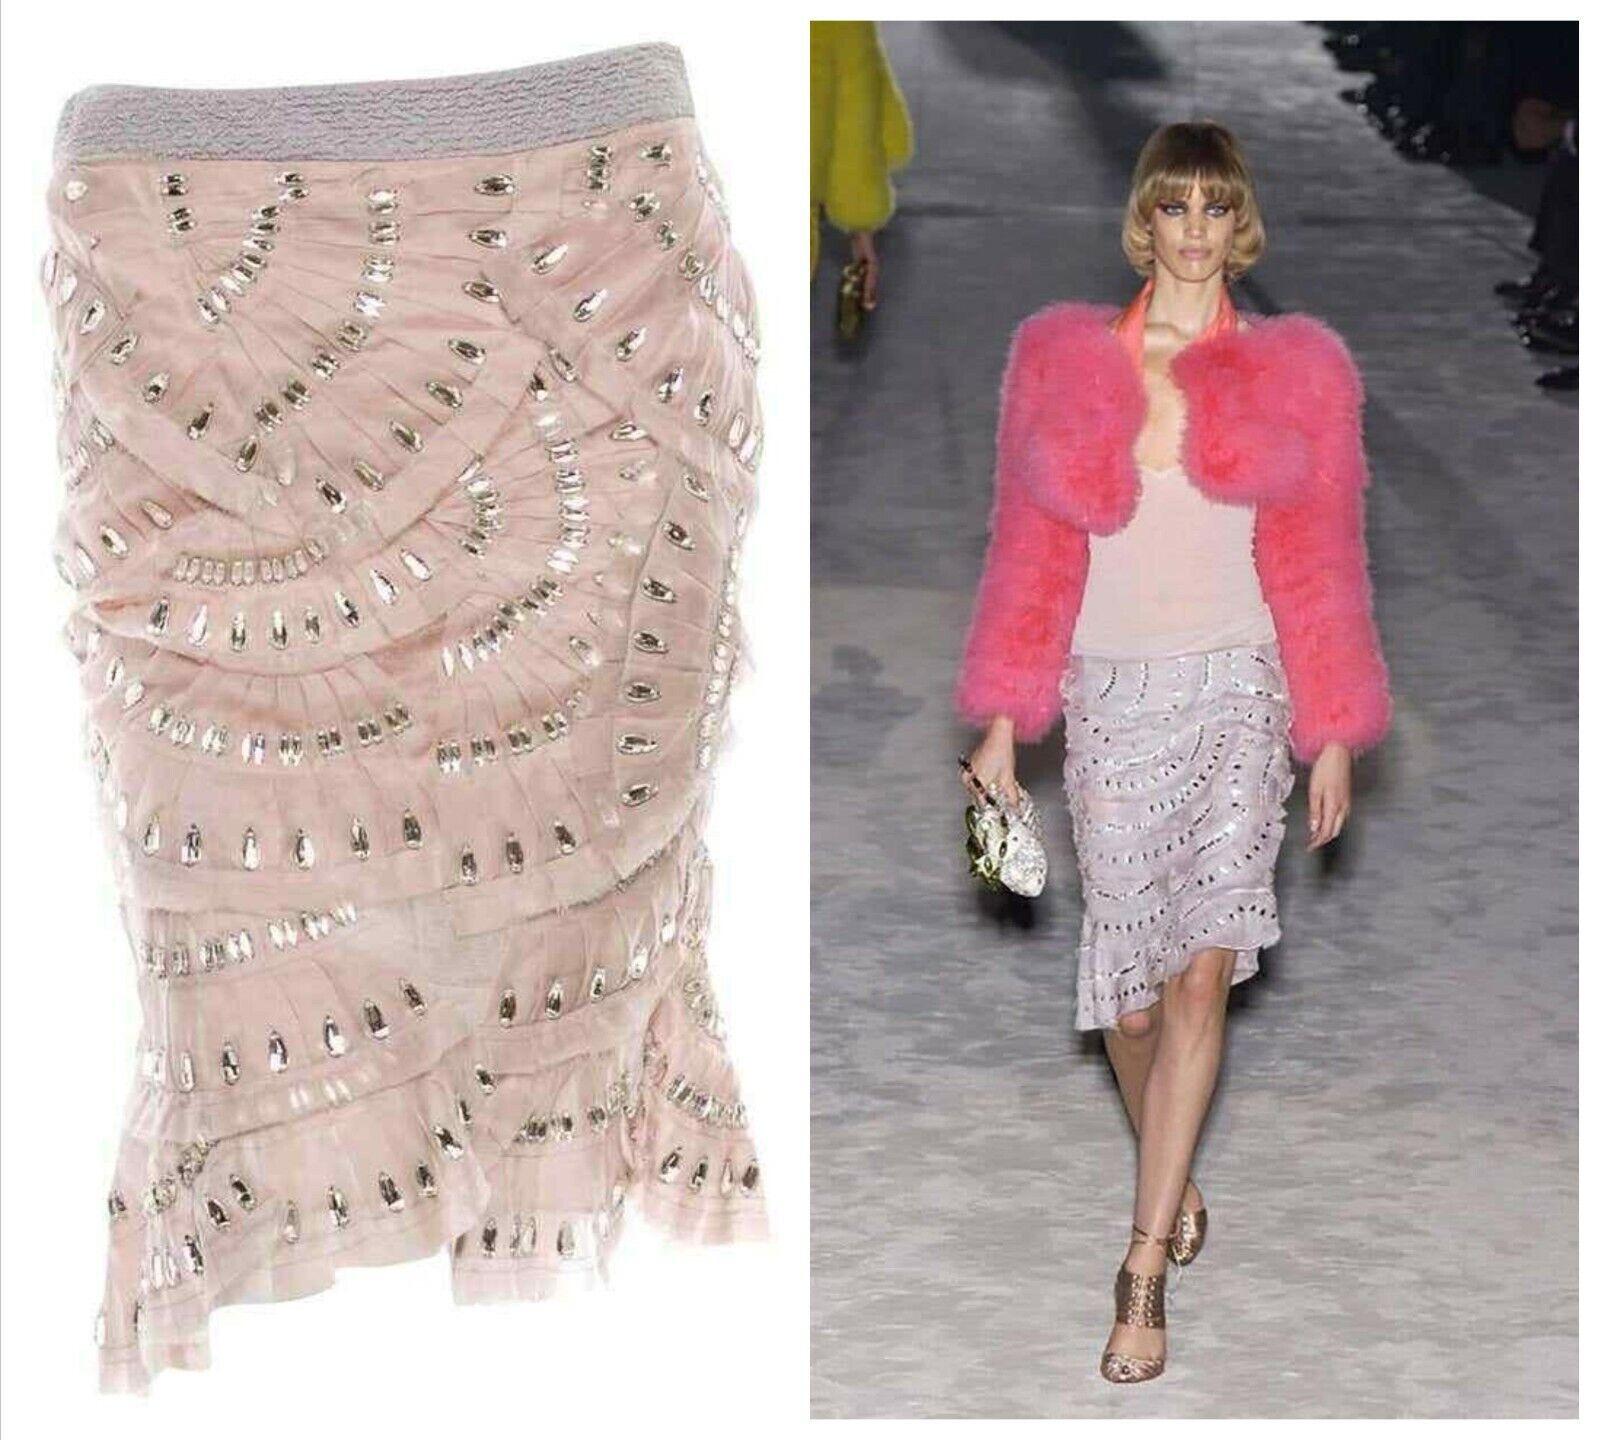 Vintage Tom Ford for Gucci Crystal Embellished Skirt, S/S 2004
S/S 2004 Runway Collection
Italian size - 40 
Nude color, Silk pleated fan design over the tulle, Finished with the clear crystals.
Measurements: Length - 21/23 inches, Waist - 30